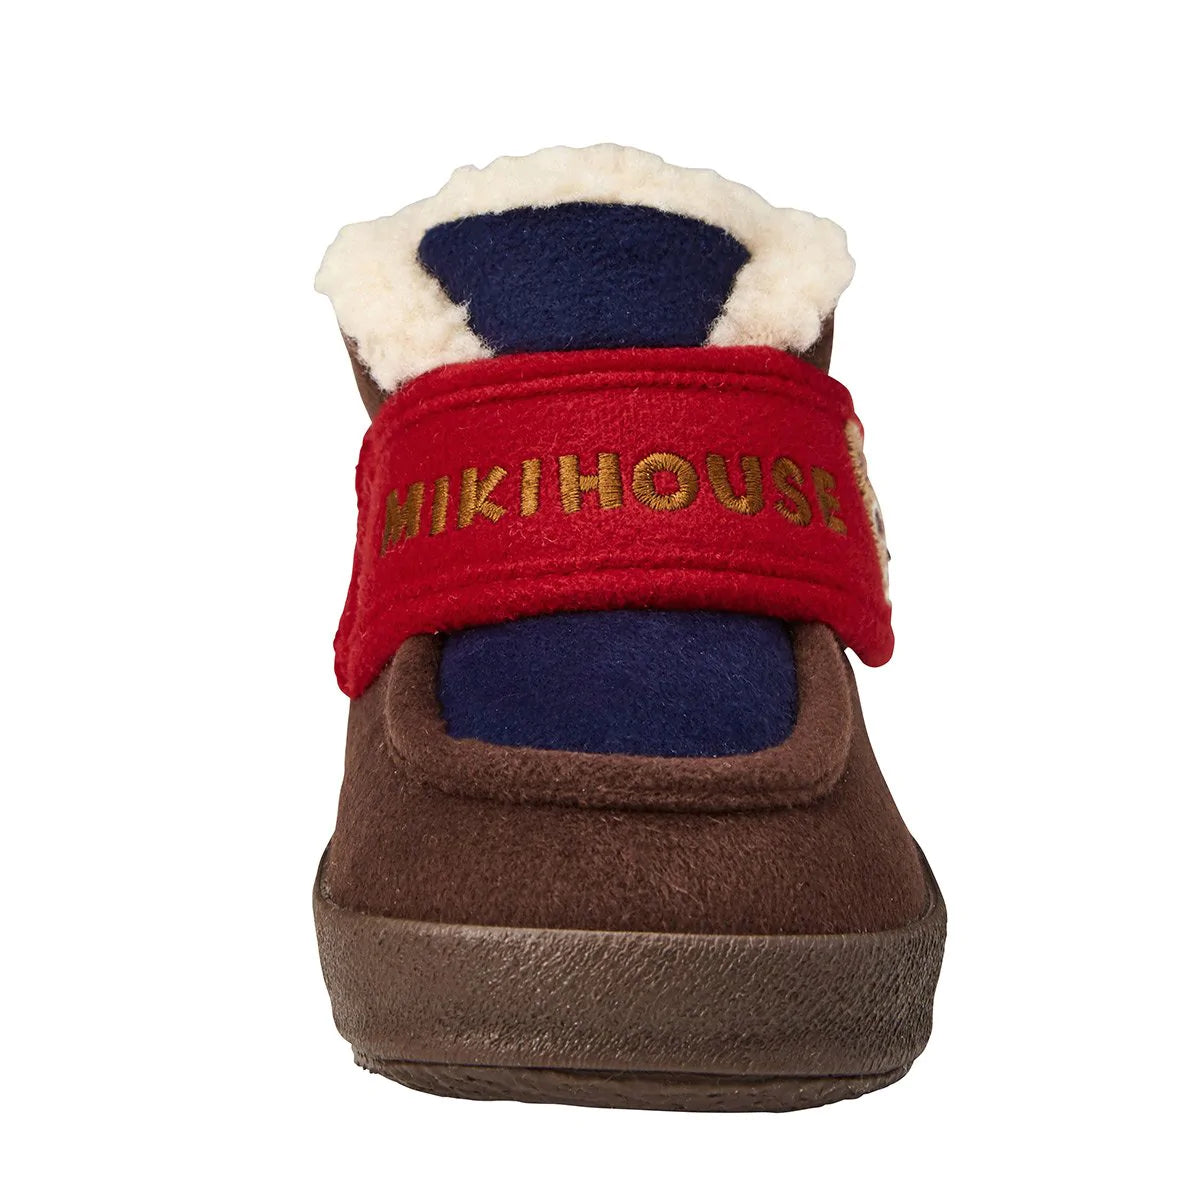 Miki House Kids Winter Booties Shoes in Navy/Brown